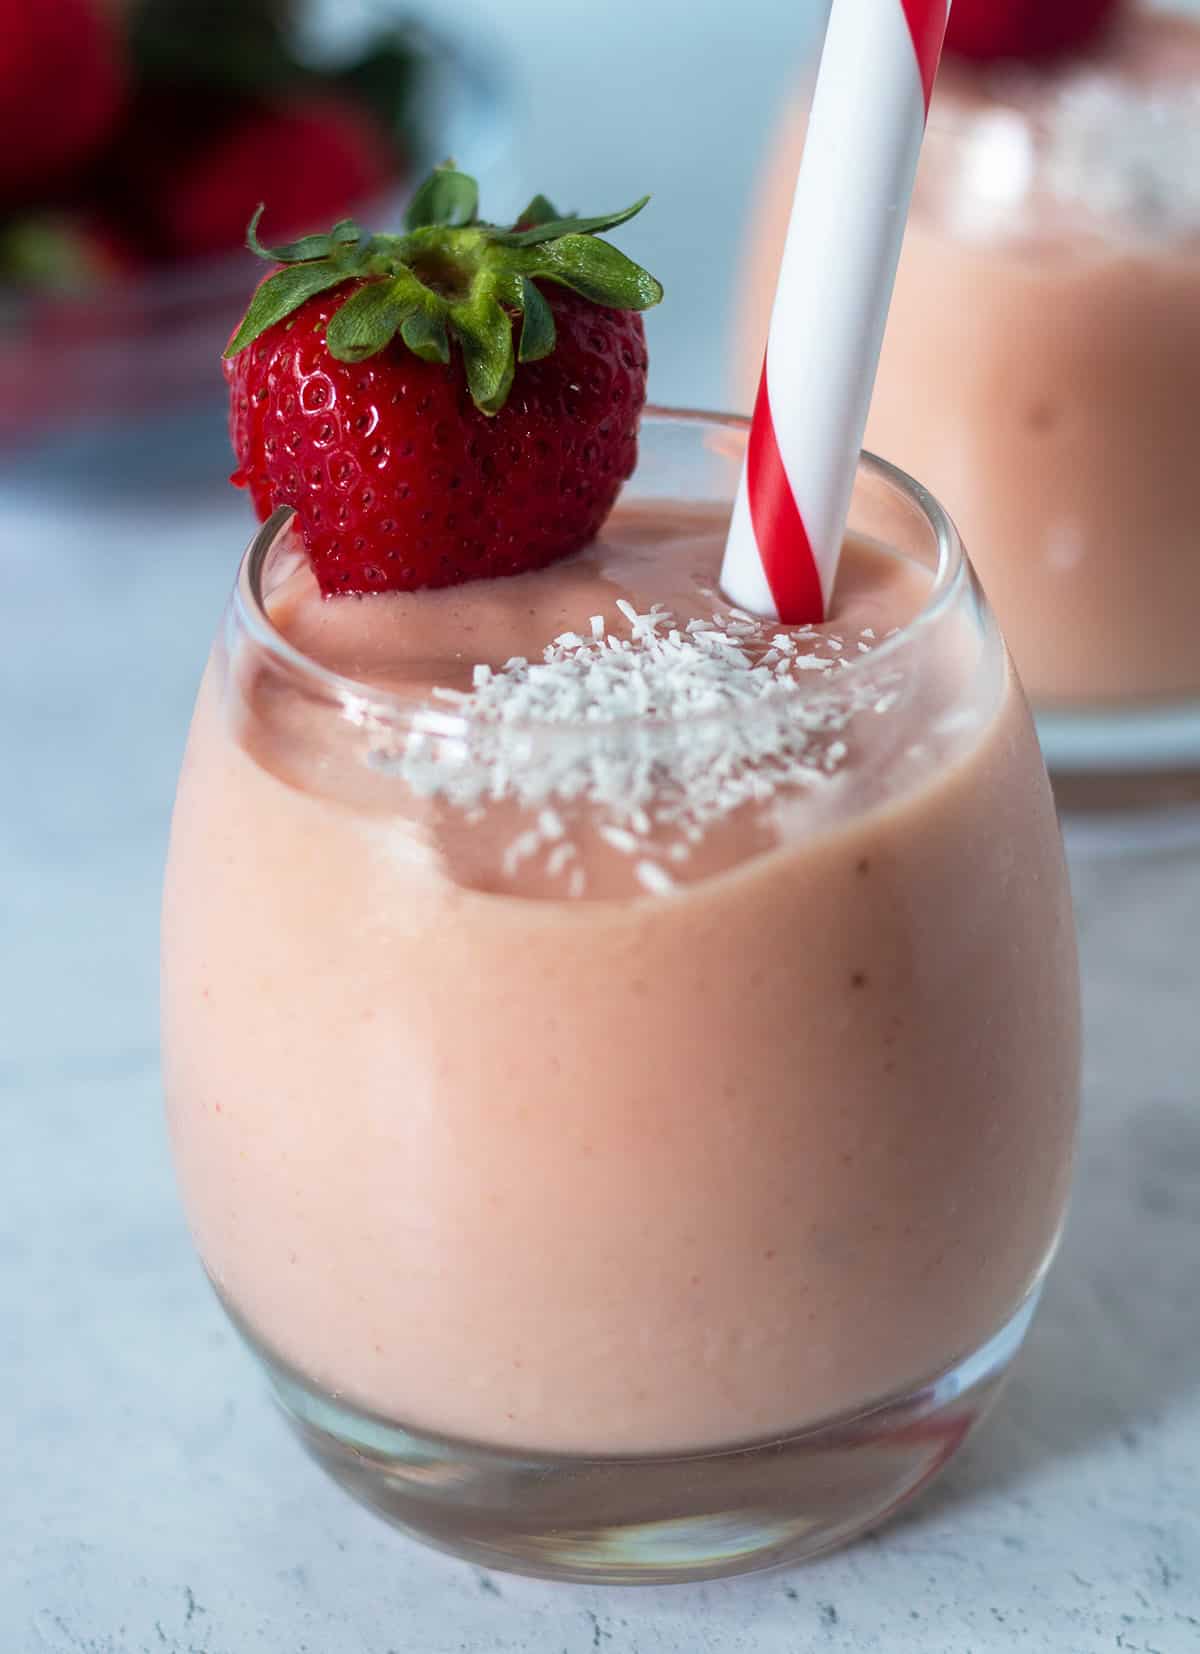 tropical smoothie in a clear glass garnished with a fresh strawberry on the side of the glass and shredded coconut on the smoothie. A red and white straw in the glass for serving.